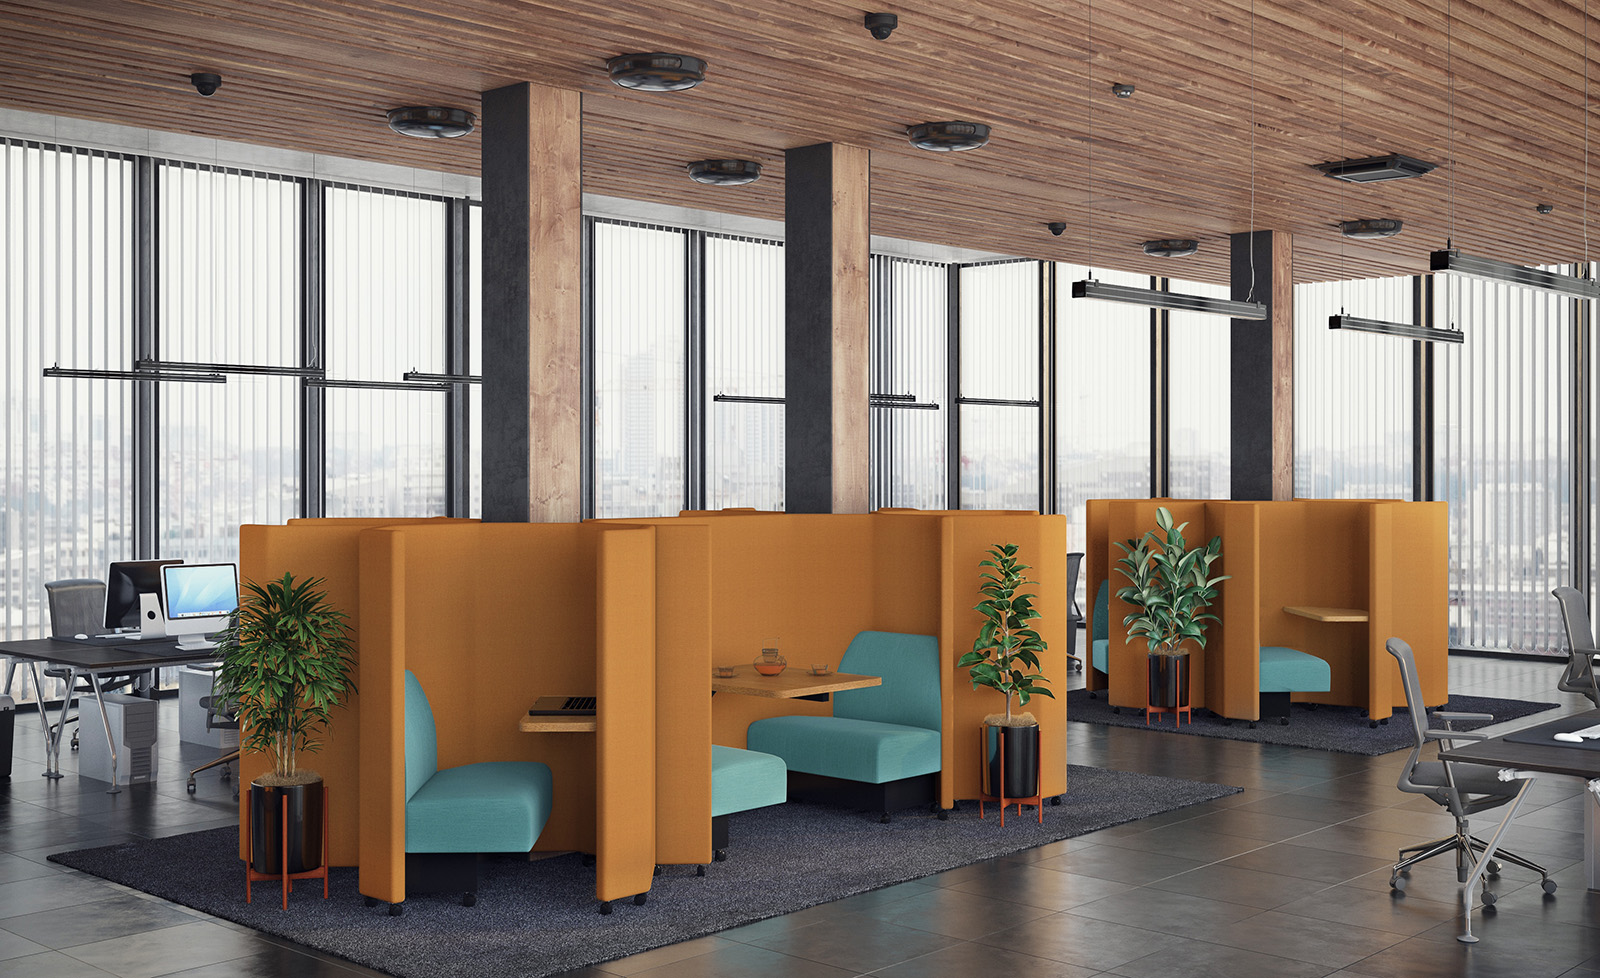 honeycomb seating pods with built-in tables and wall in office environment